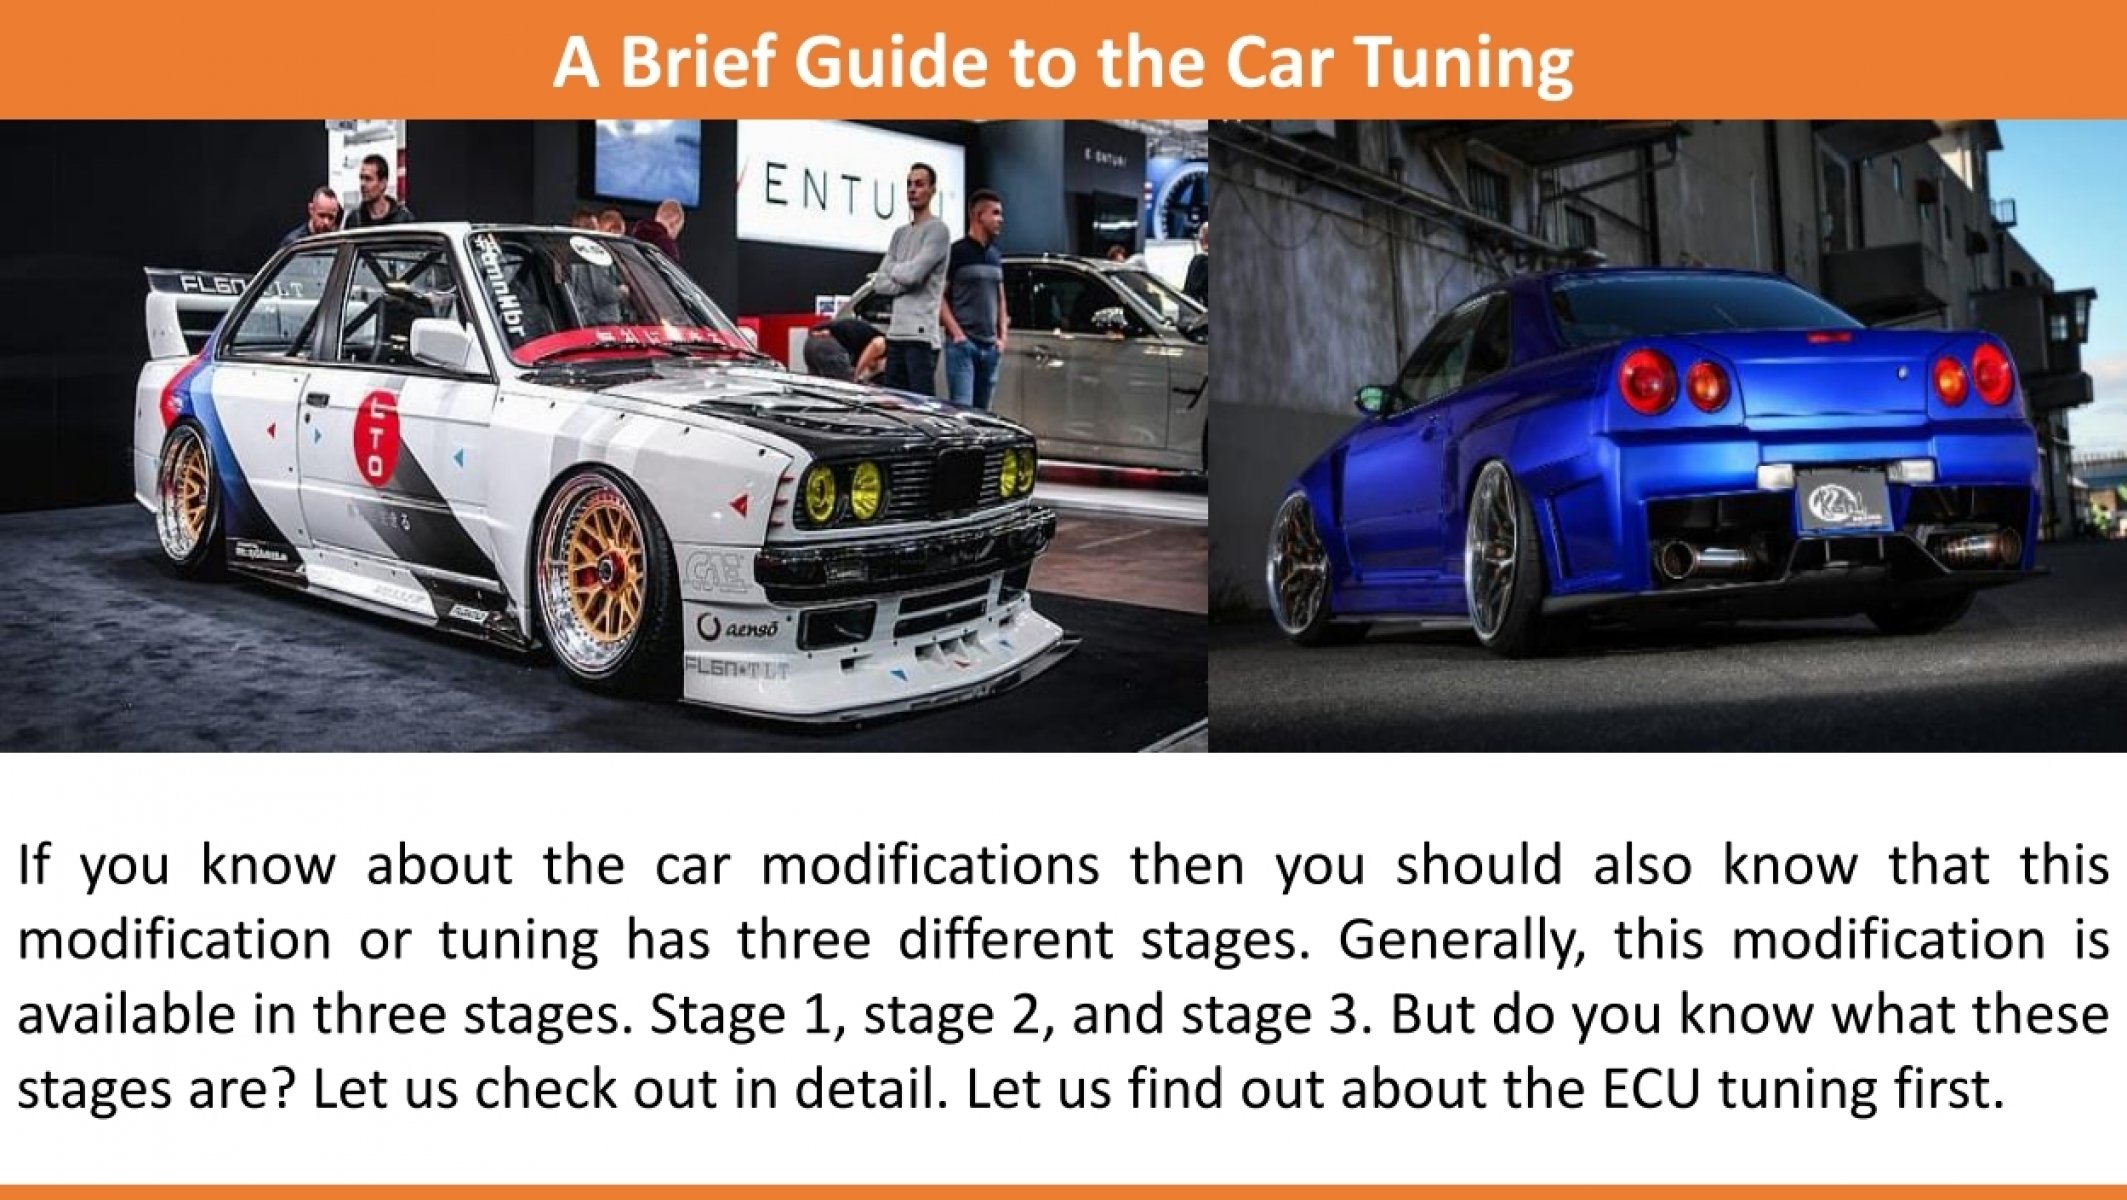 Car Tuning: What Do You Need to Know?